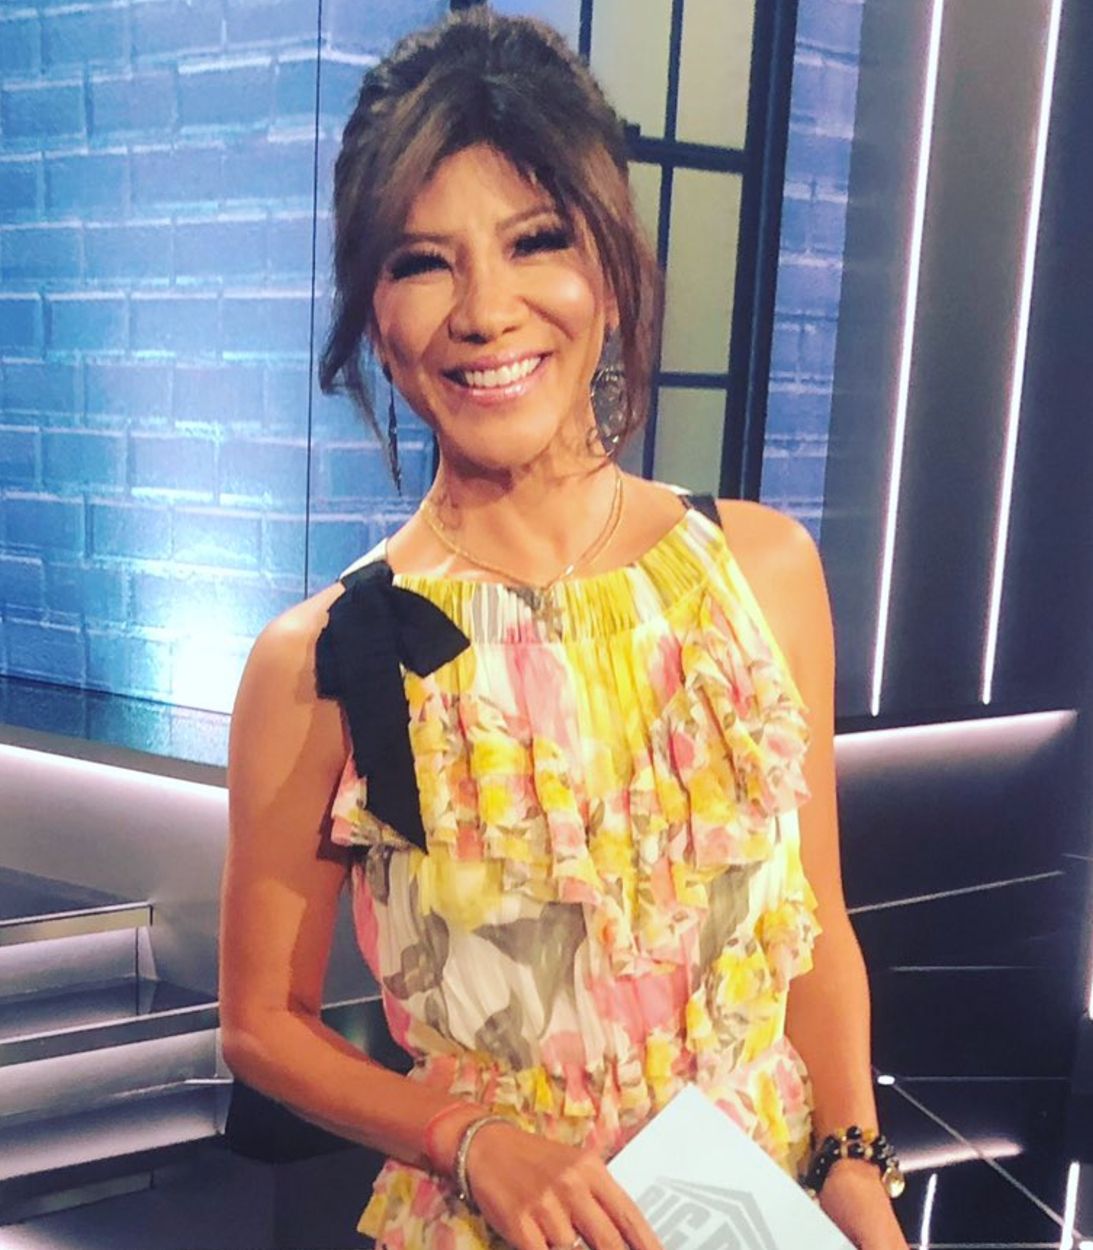 Julie Chen on Big Brother 22 All Stars first eviction night vertical